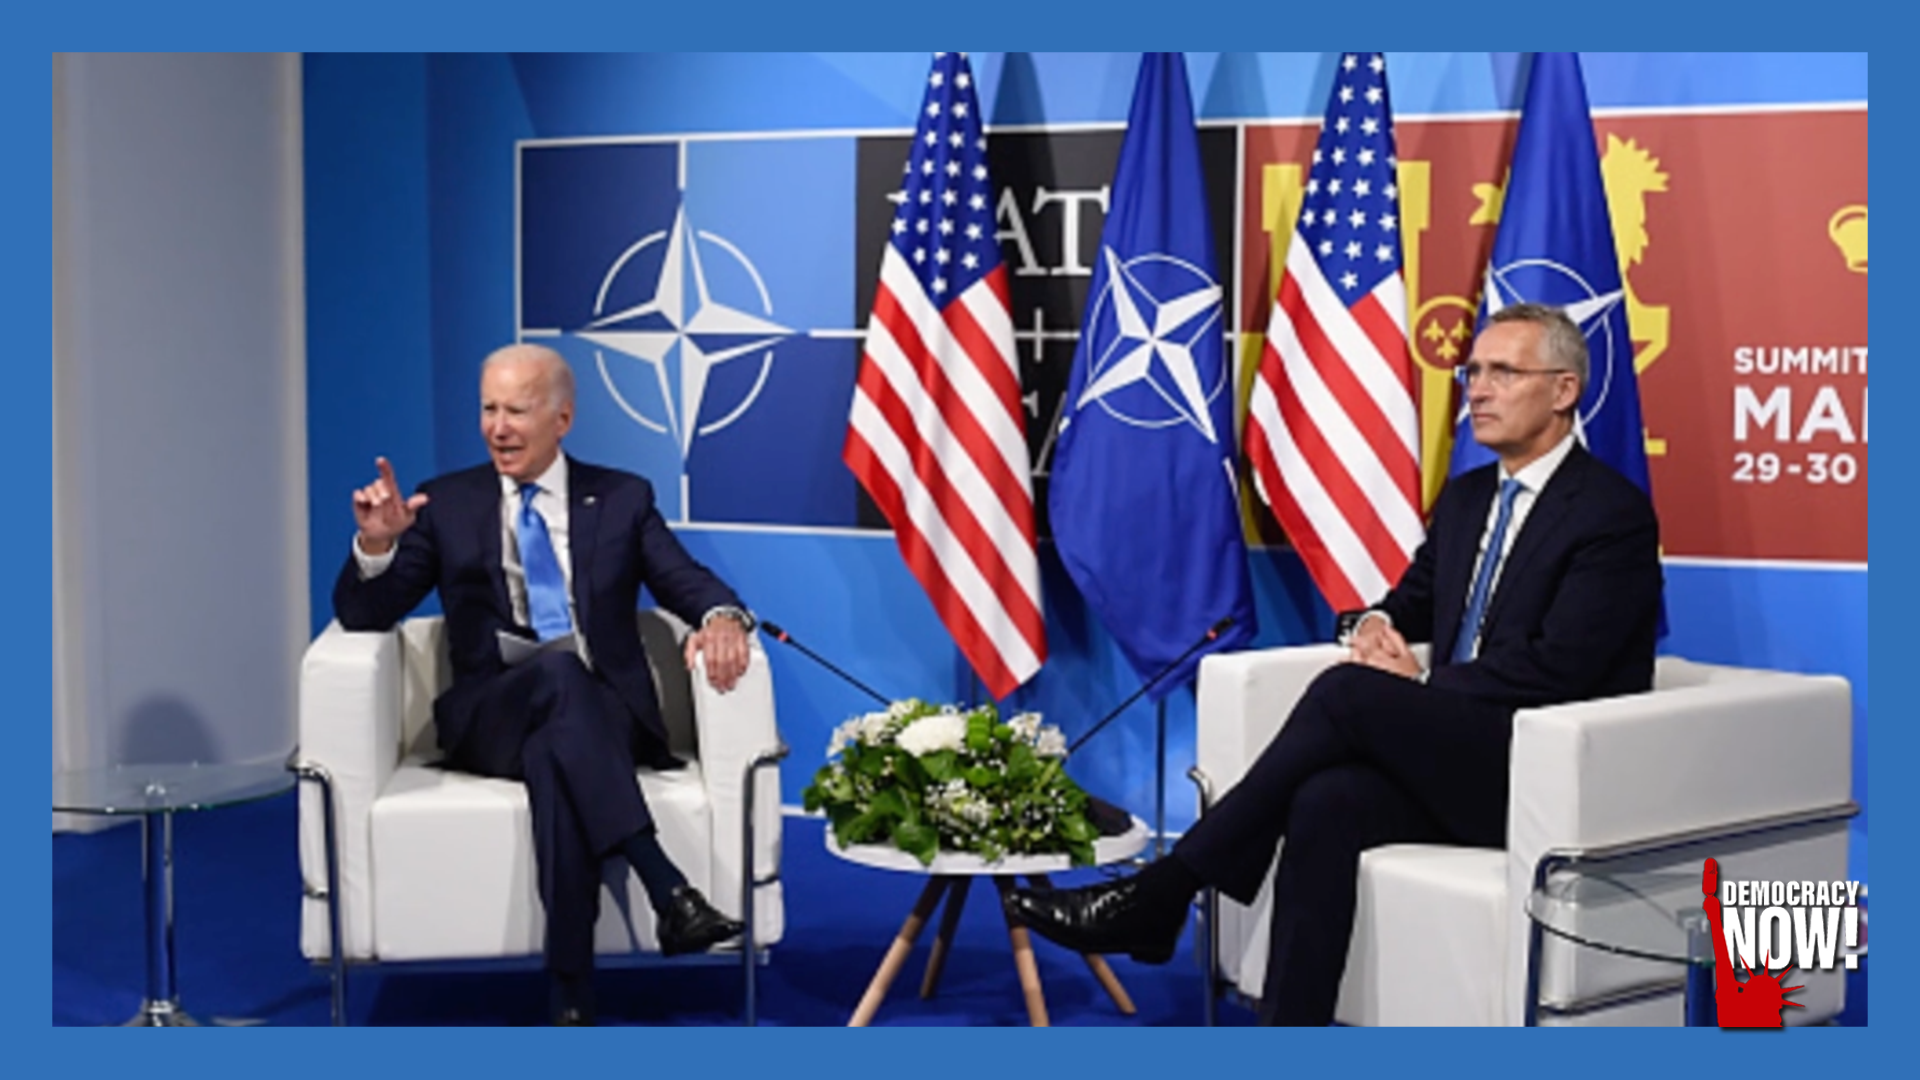 Anatol Lieven on NATO Expansion & What a Ukraine Peace Settlement Could Look Like